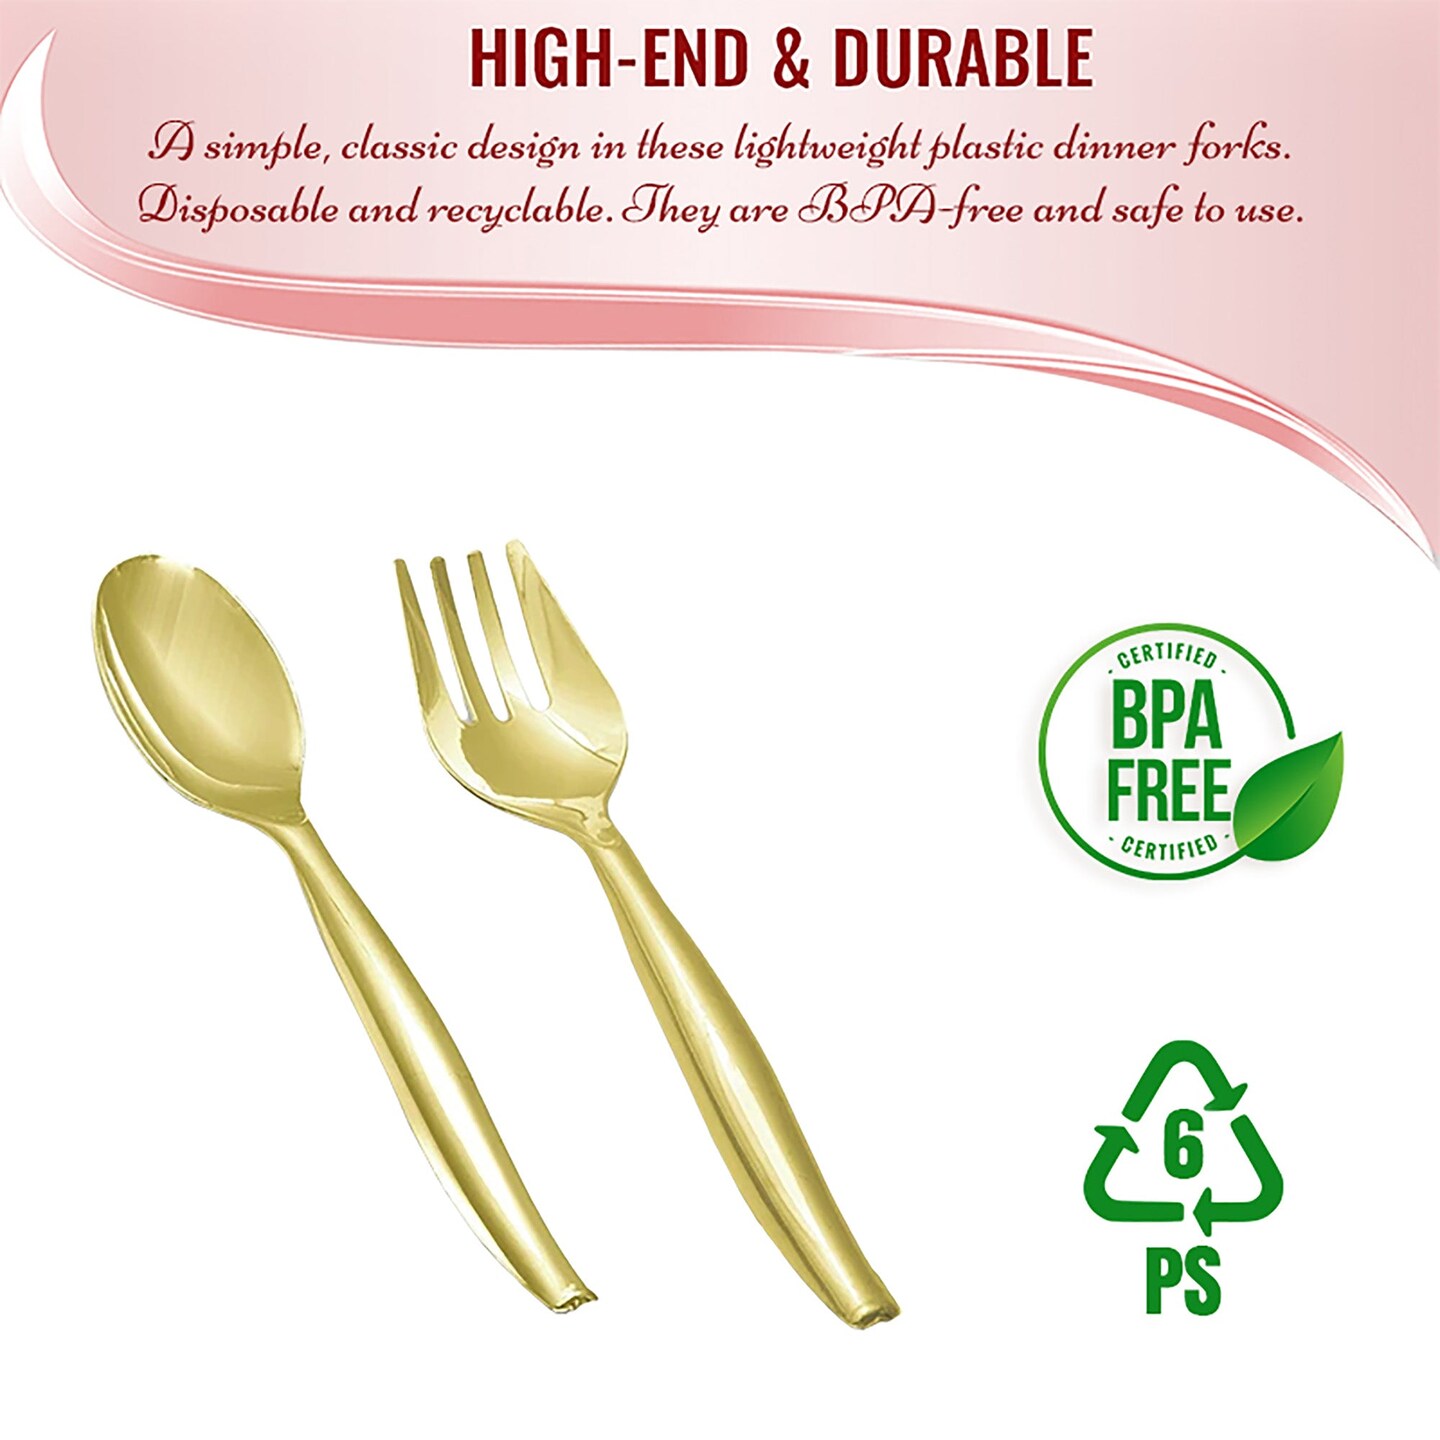 Gold Disposable Plastic Serving Flatware Set - Serving Spoons and Serving Forks (60 Pairs)